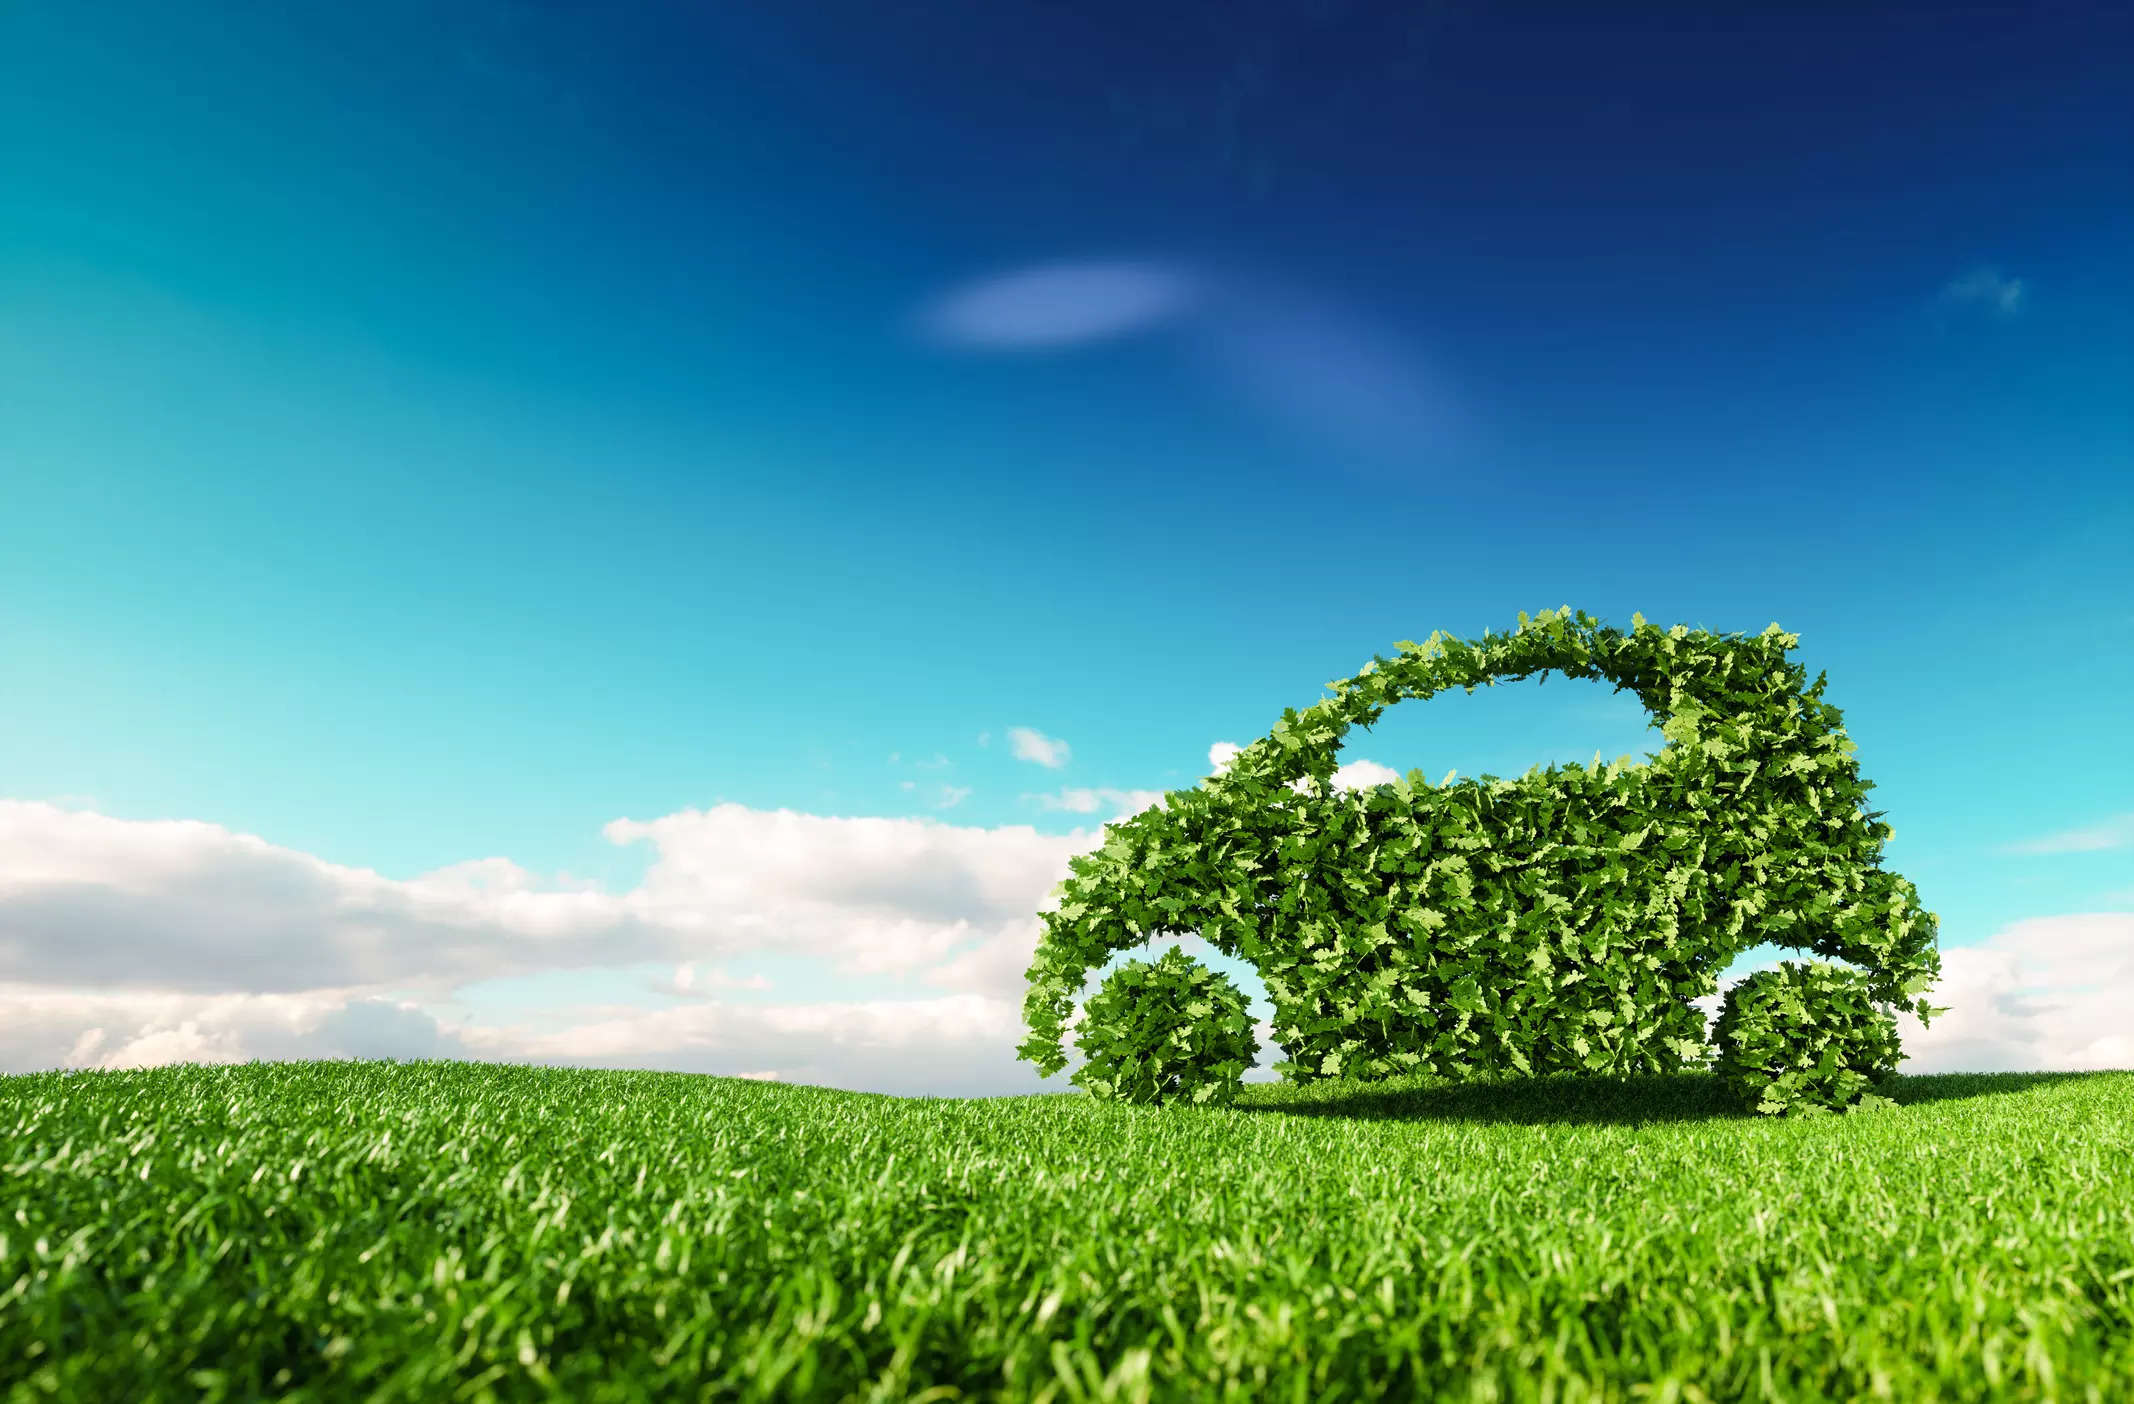  In October 2018, the Union ministry of road transport and highways issued a notification to exempt EVs and vehicles run on biofuel from needing permits. However, Karnataka is implementing this only now.